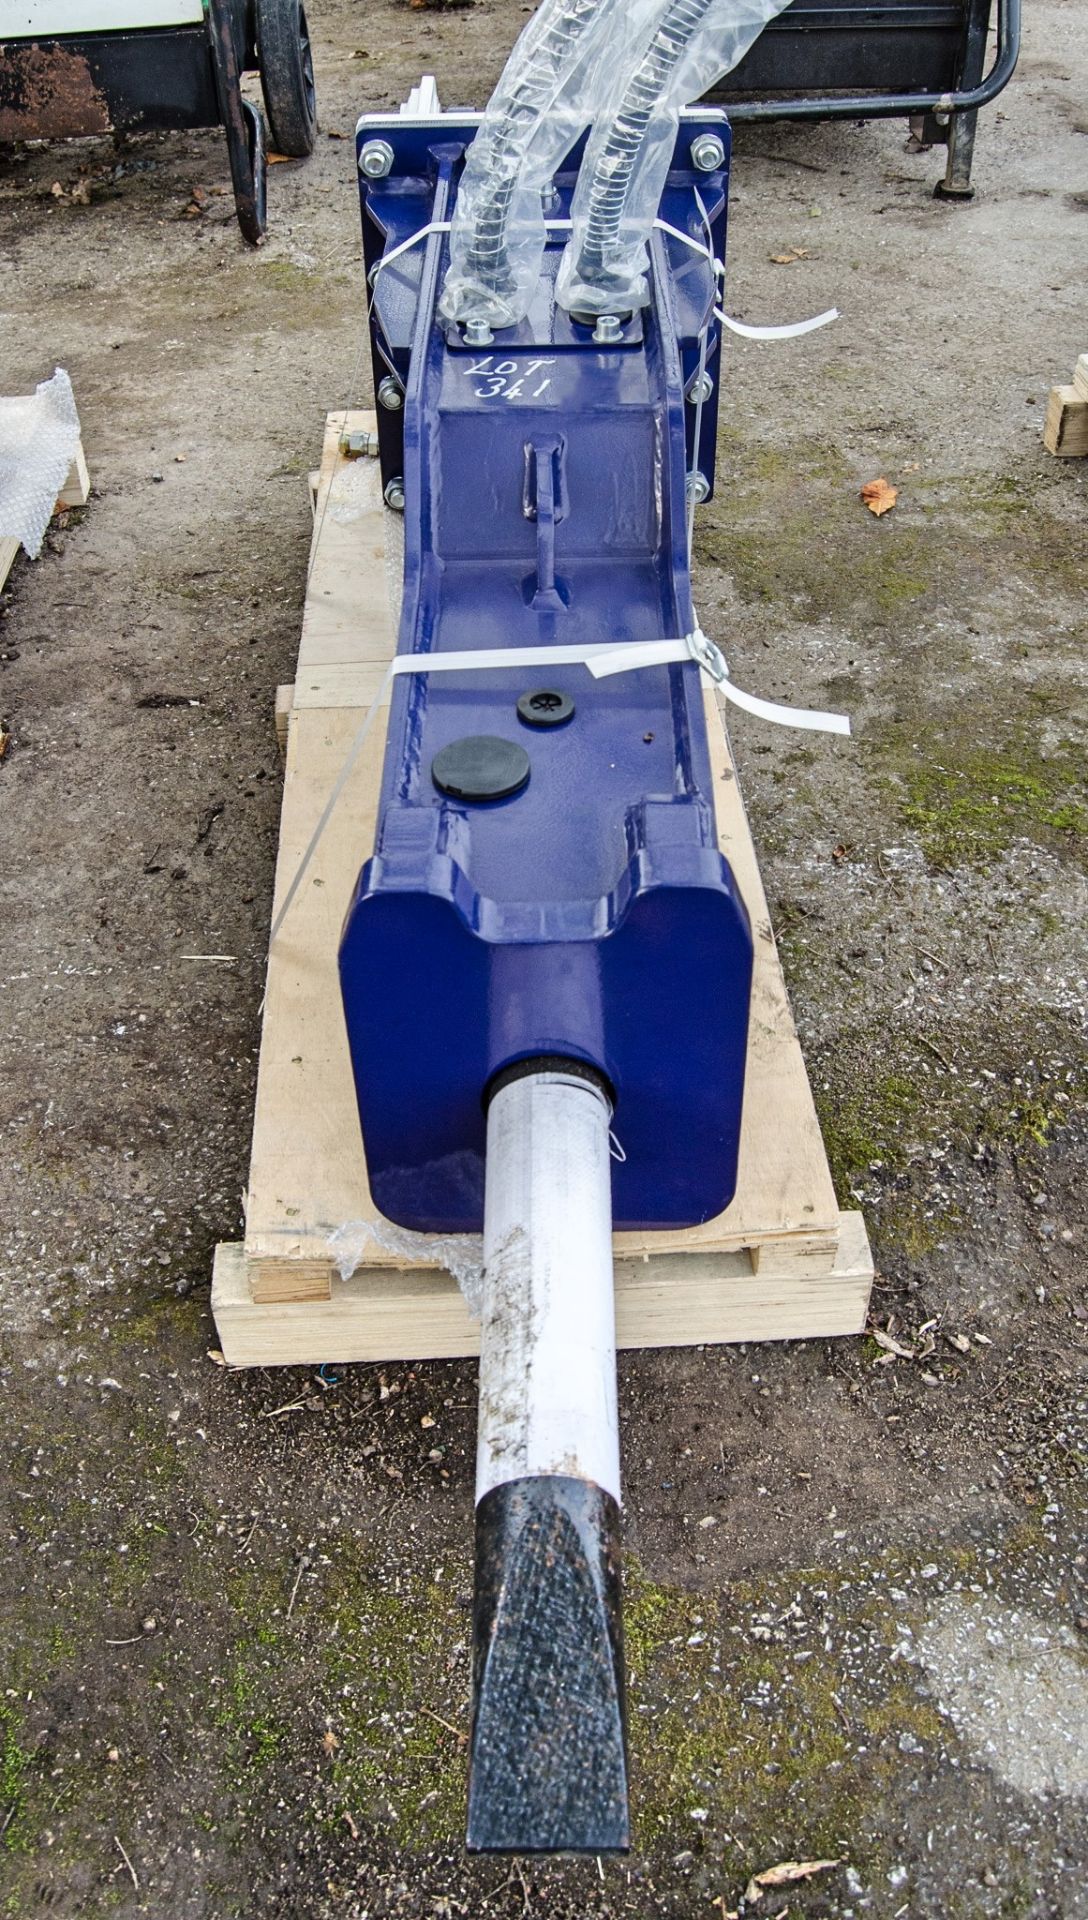 Hirox HDX20 hydraulic breaker to suit 5 tonne excavator Pin diameter: 45mm Pin centres: 240mm Pin - Image 3 of 4